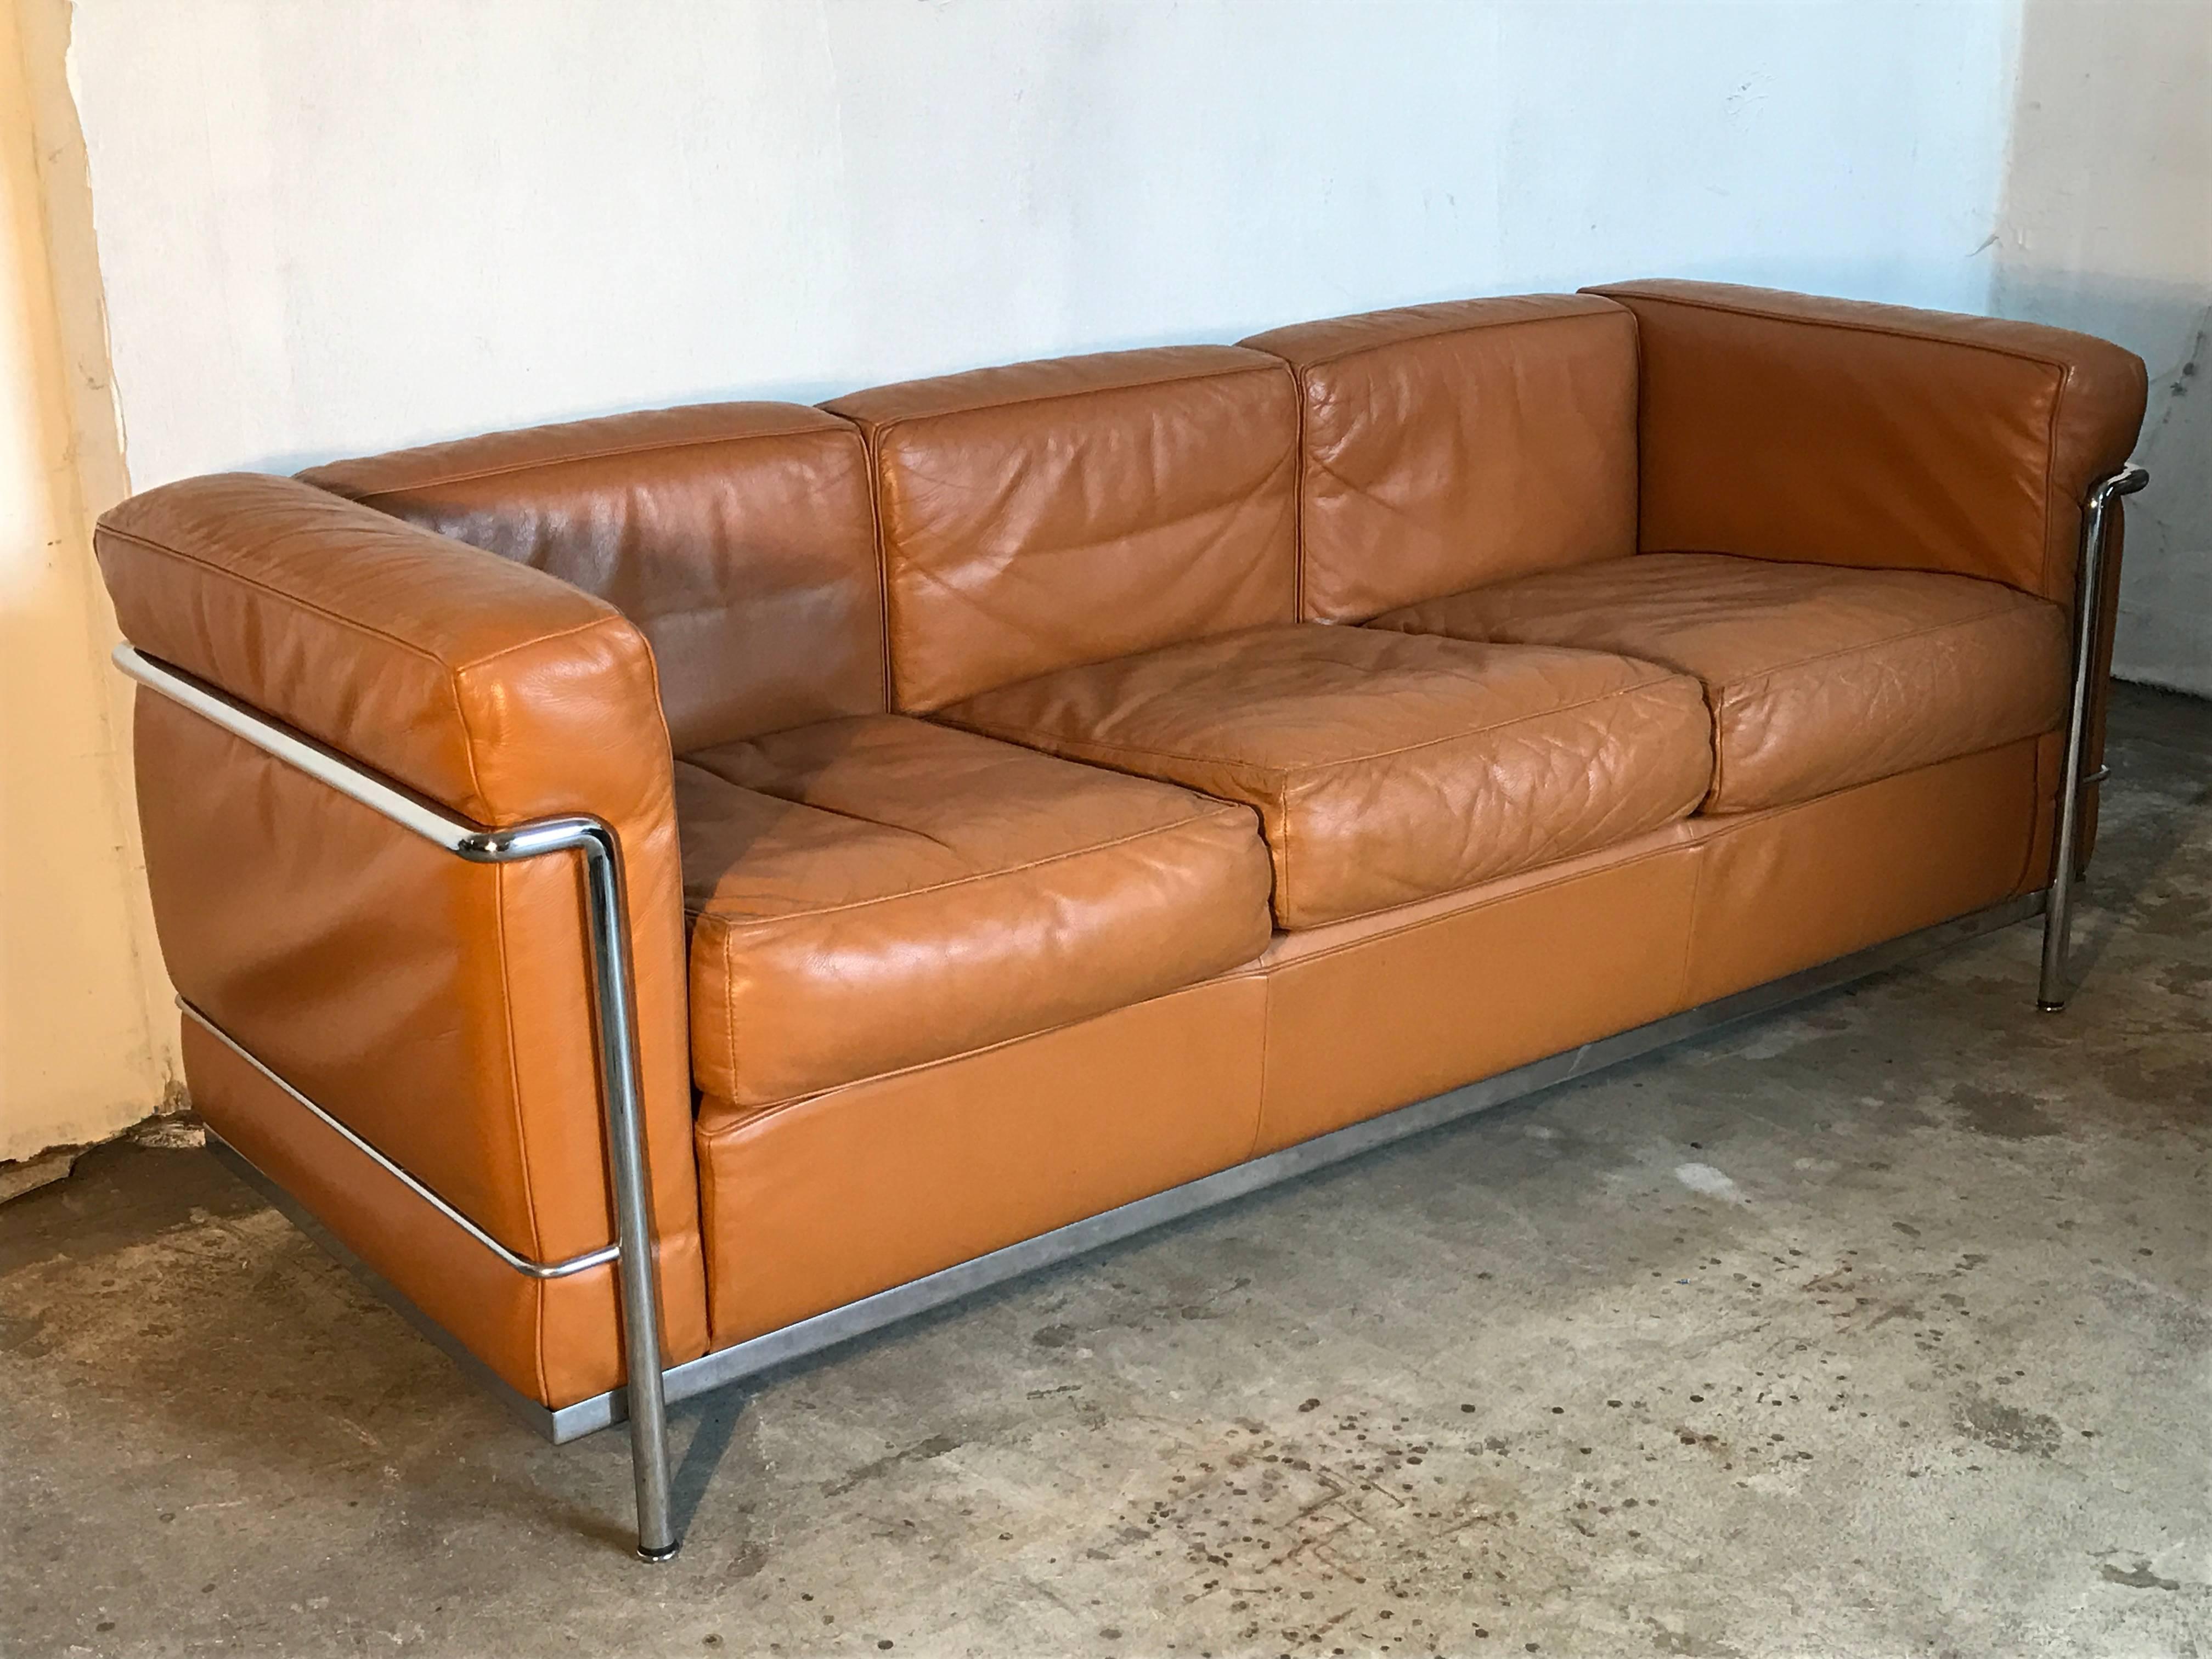 The famous LC2 sofa from Le Corbusier in collaboration with the designer Charlotte Perriand and his cousin Pierre Jeanneret for the 1927 Paris Autumn Salon.
This sofa from the 1980s has a nice material combination, chrome frame with brown leather